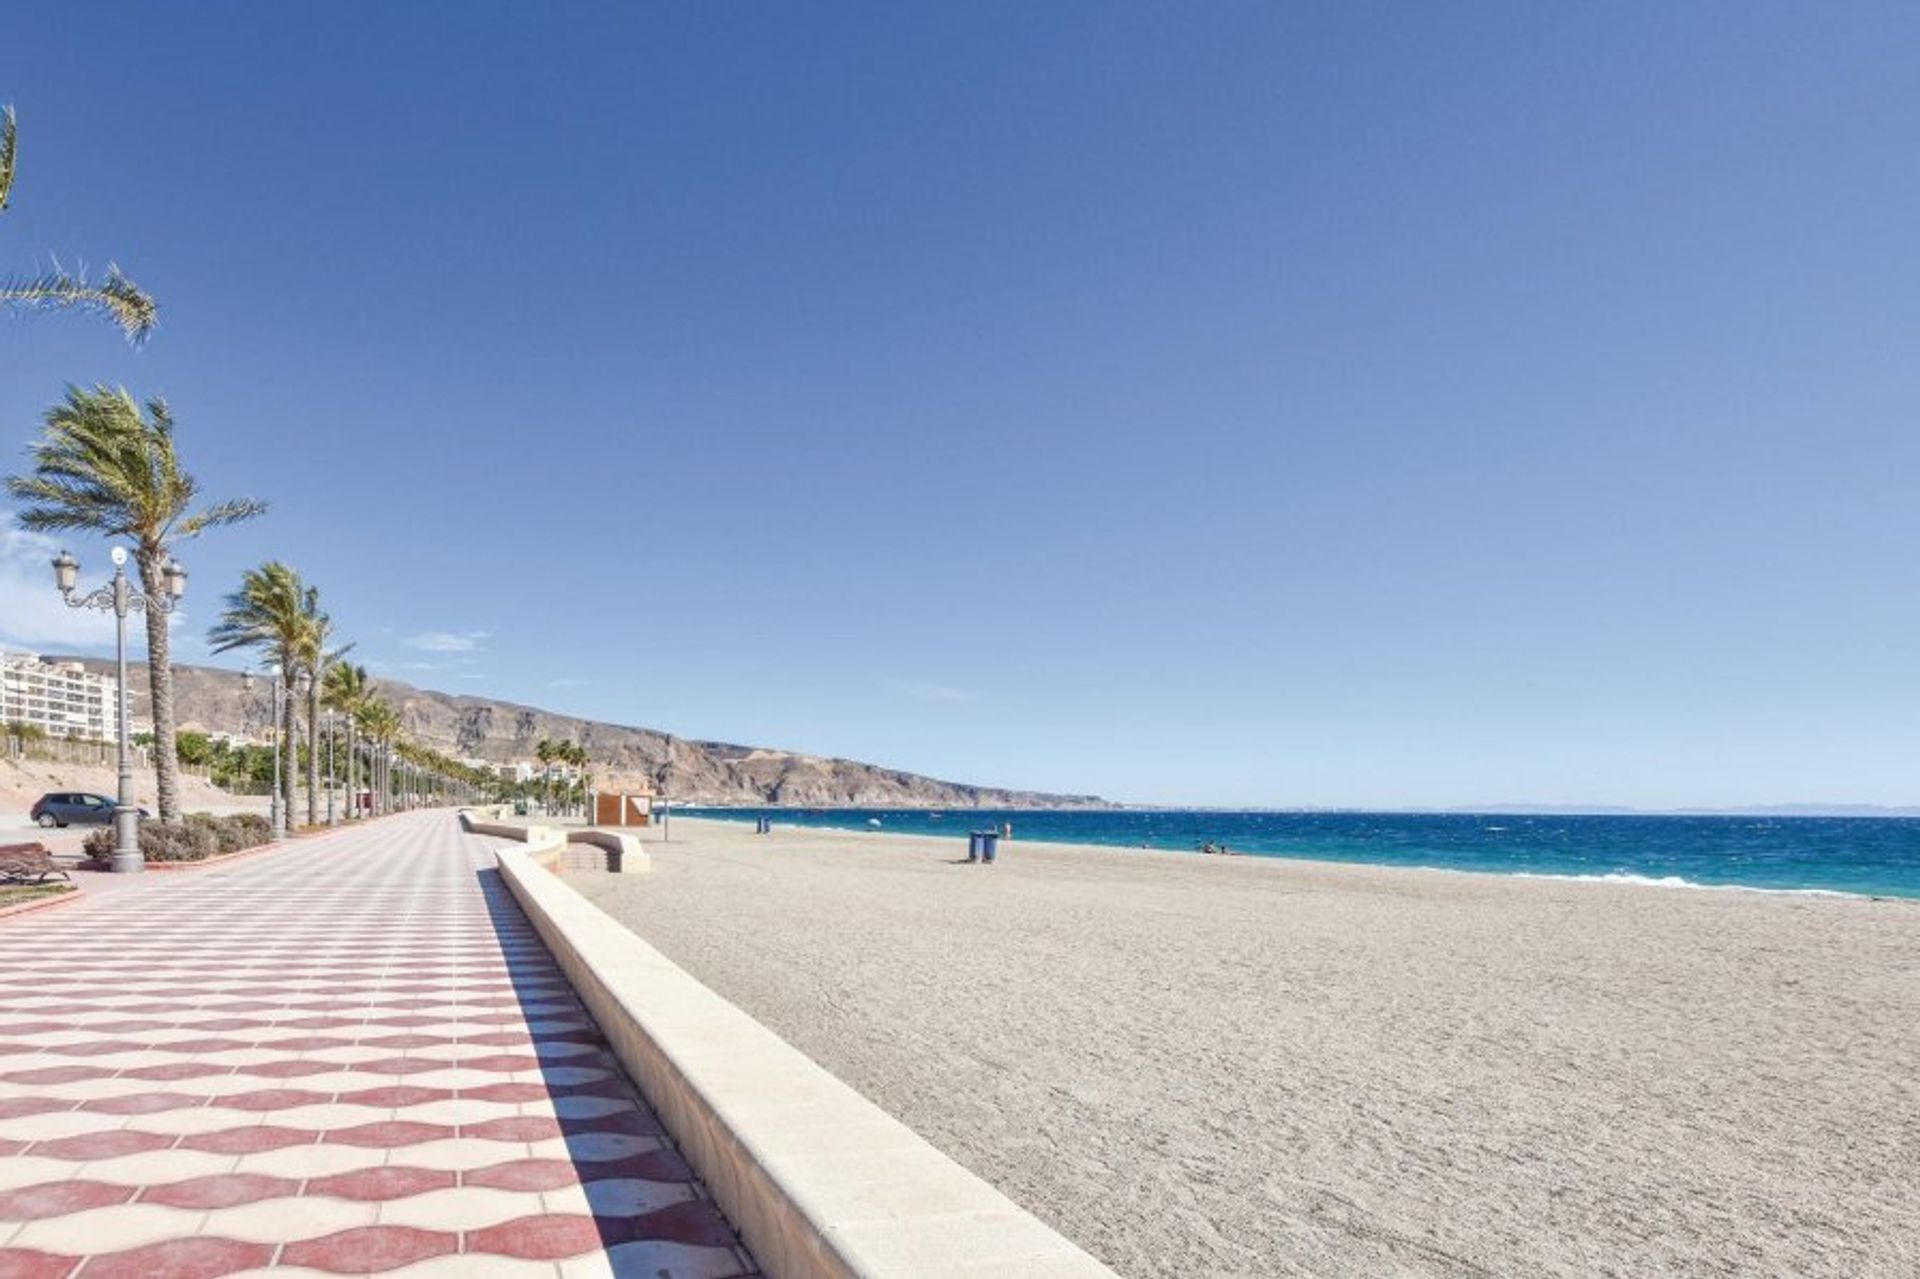 Soak up the sun or have a cooling dip in the deep, calm waters of Aguadulce beach, a 15-minute drive from Roquetas de Mar